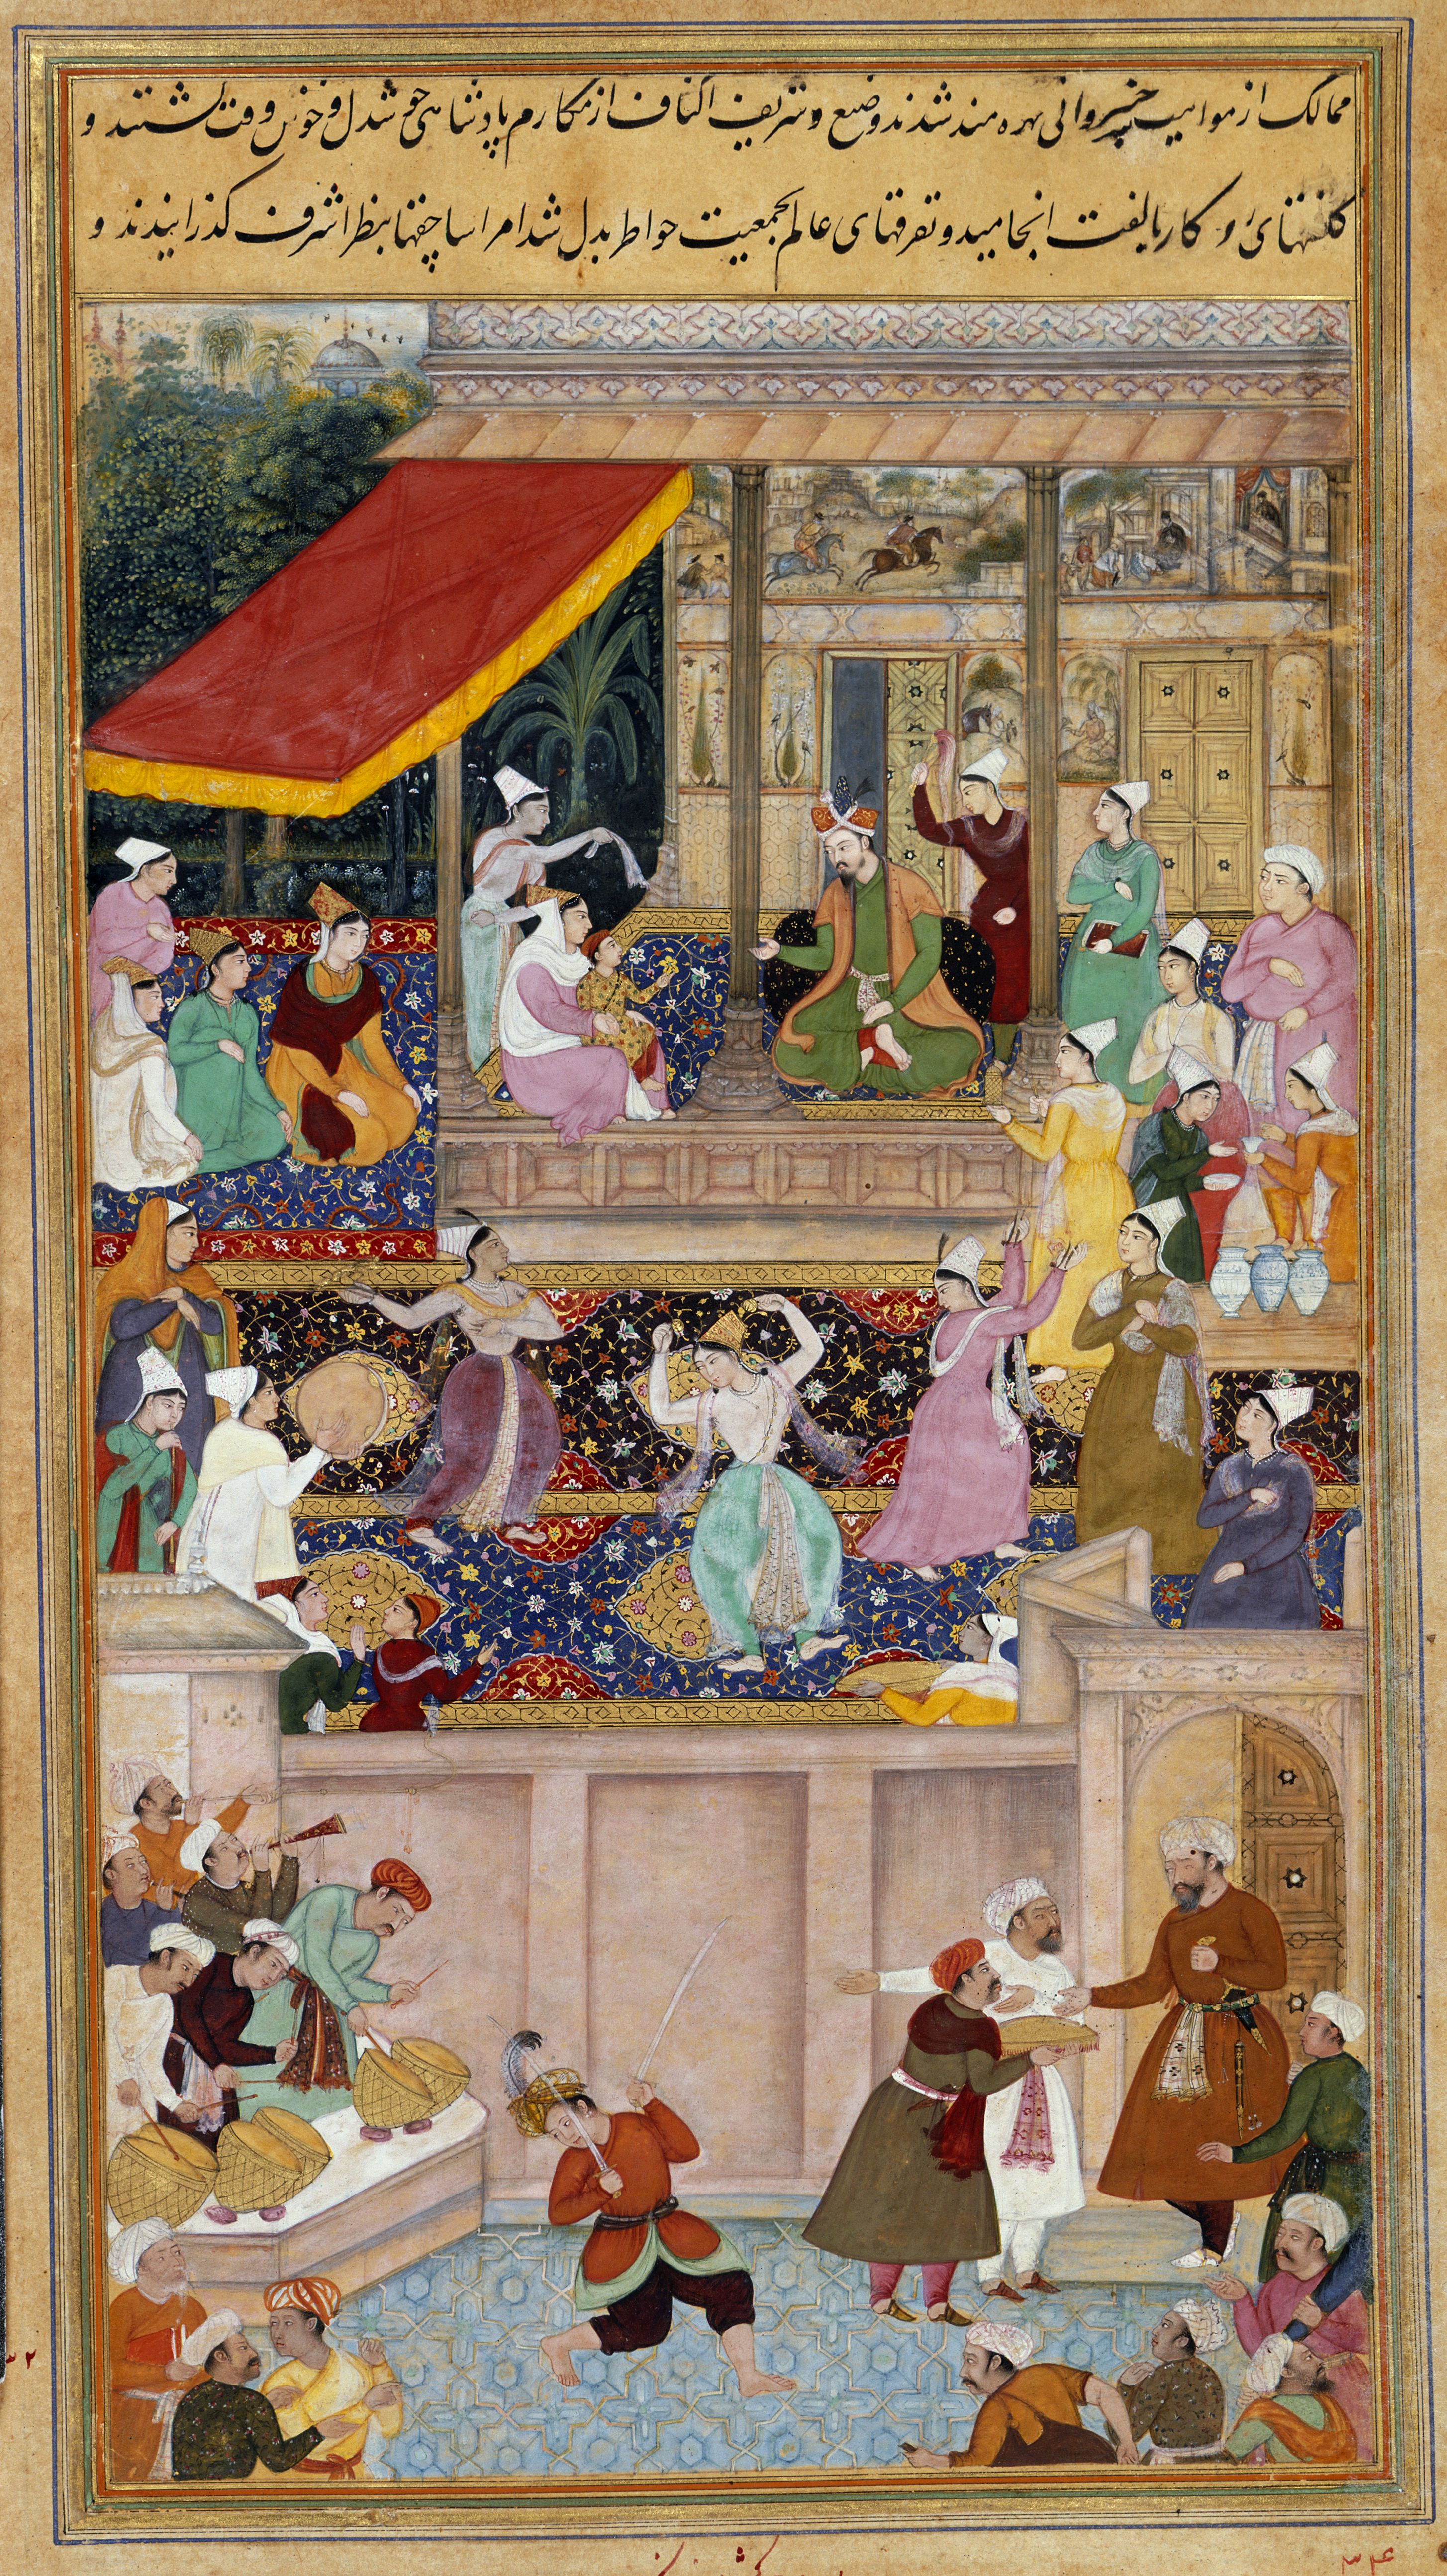 A Christmas encounter: Three vistors bow before a mother and baby in a familiar scene in the background of a Mughal painting of the Emperor Akbar. See the manuscript on the British Library's site at http://www.bl.uk/manuscripts/Viewer.aspx?ref=or_12988_f114r